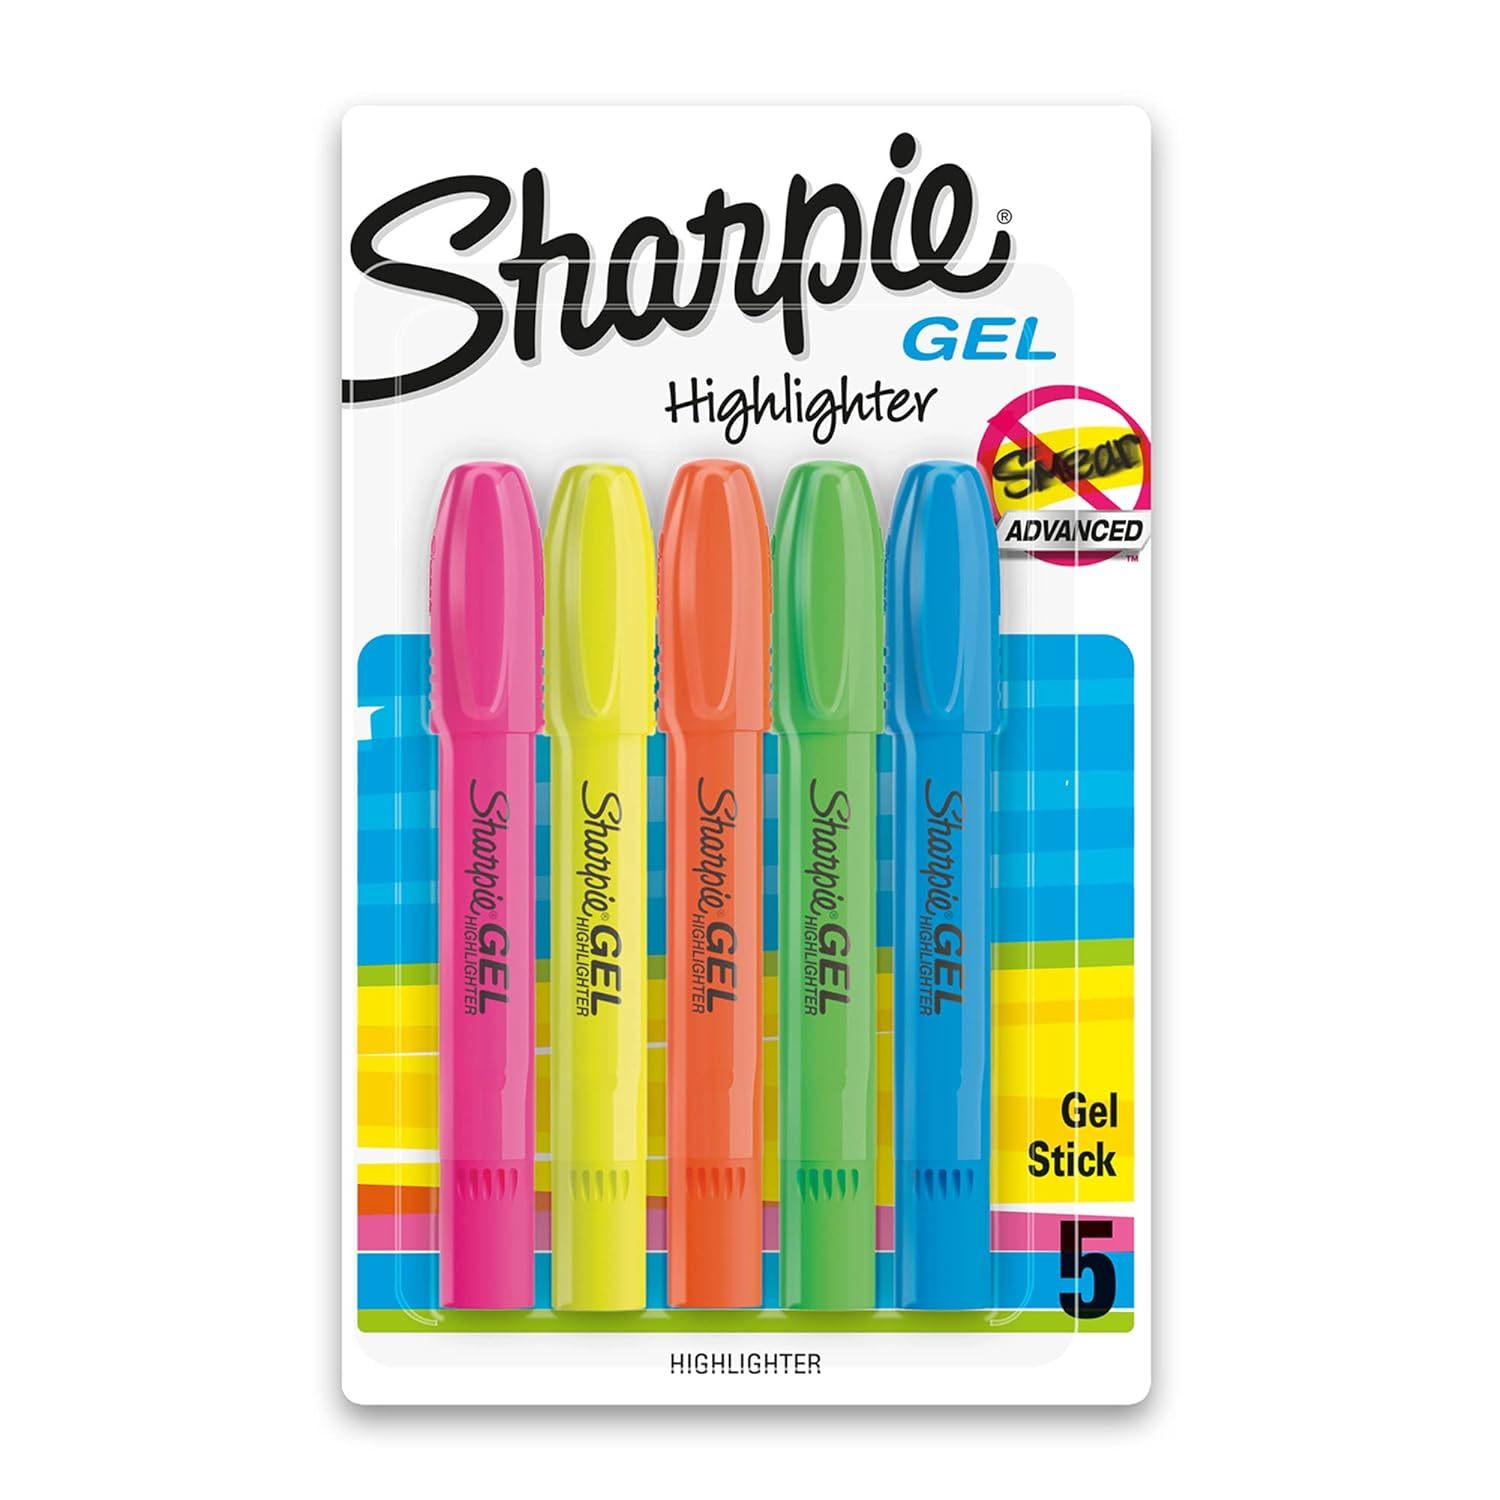 Sharpie Gel Highlighters, Bullet Tip, Assorted Colors, 5 Count - $18.99